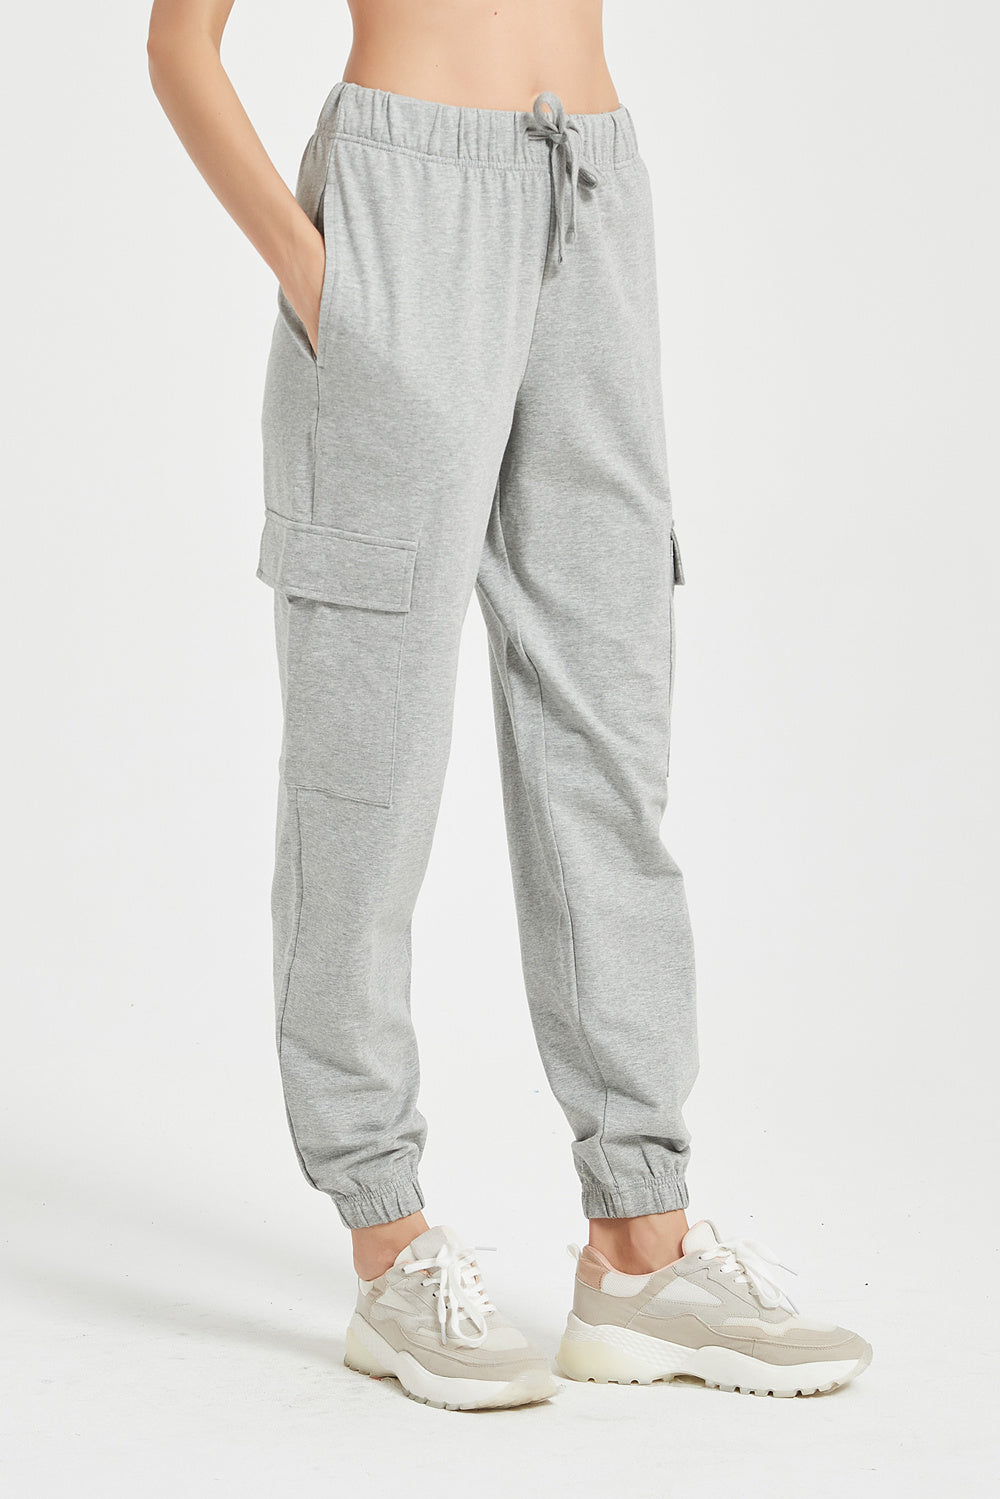 Cargo Sweat Pants for Women Wide Leg Joggers with Large Pockets by